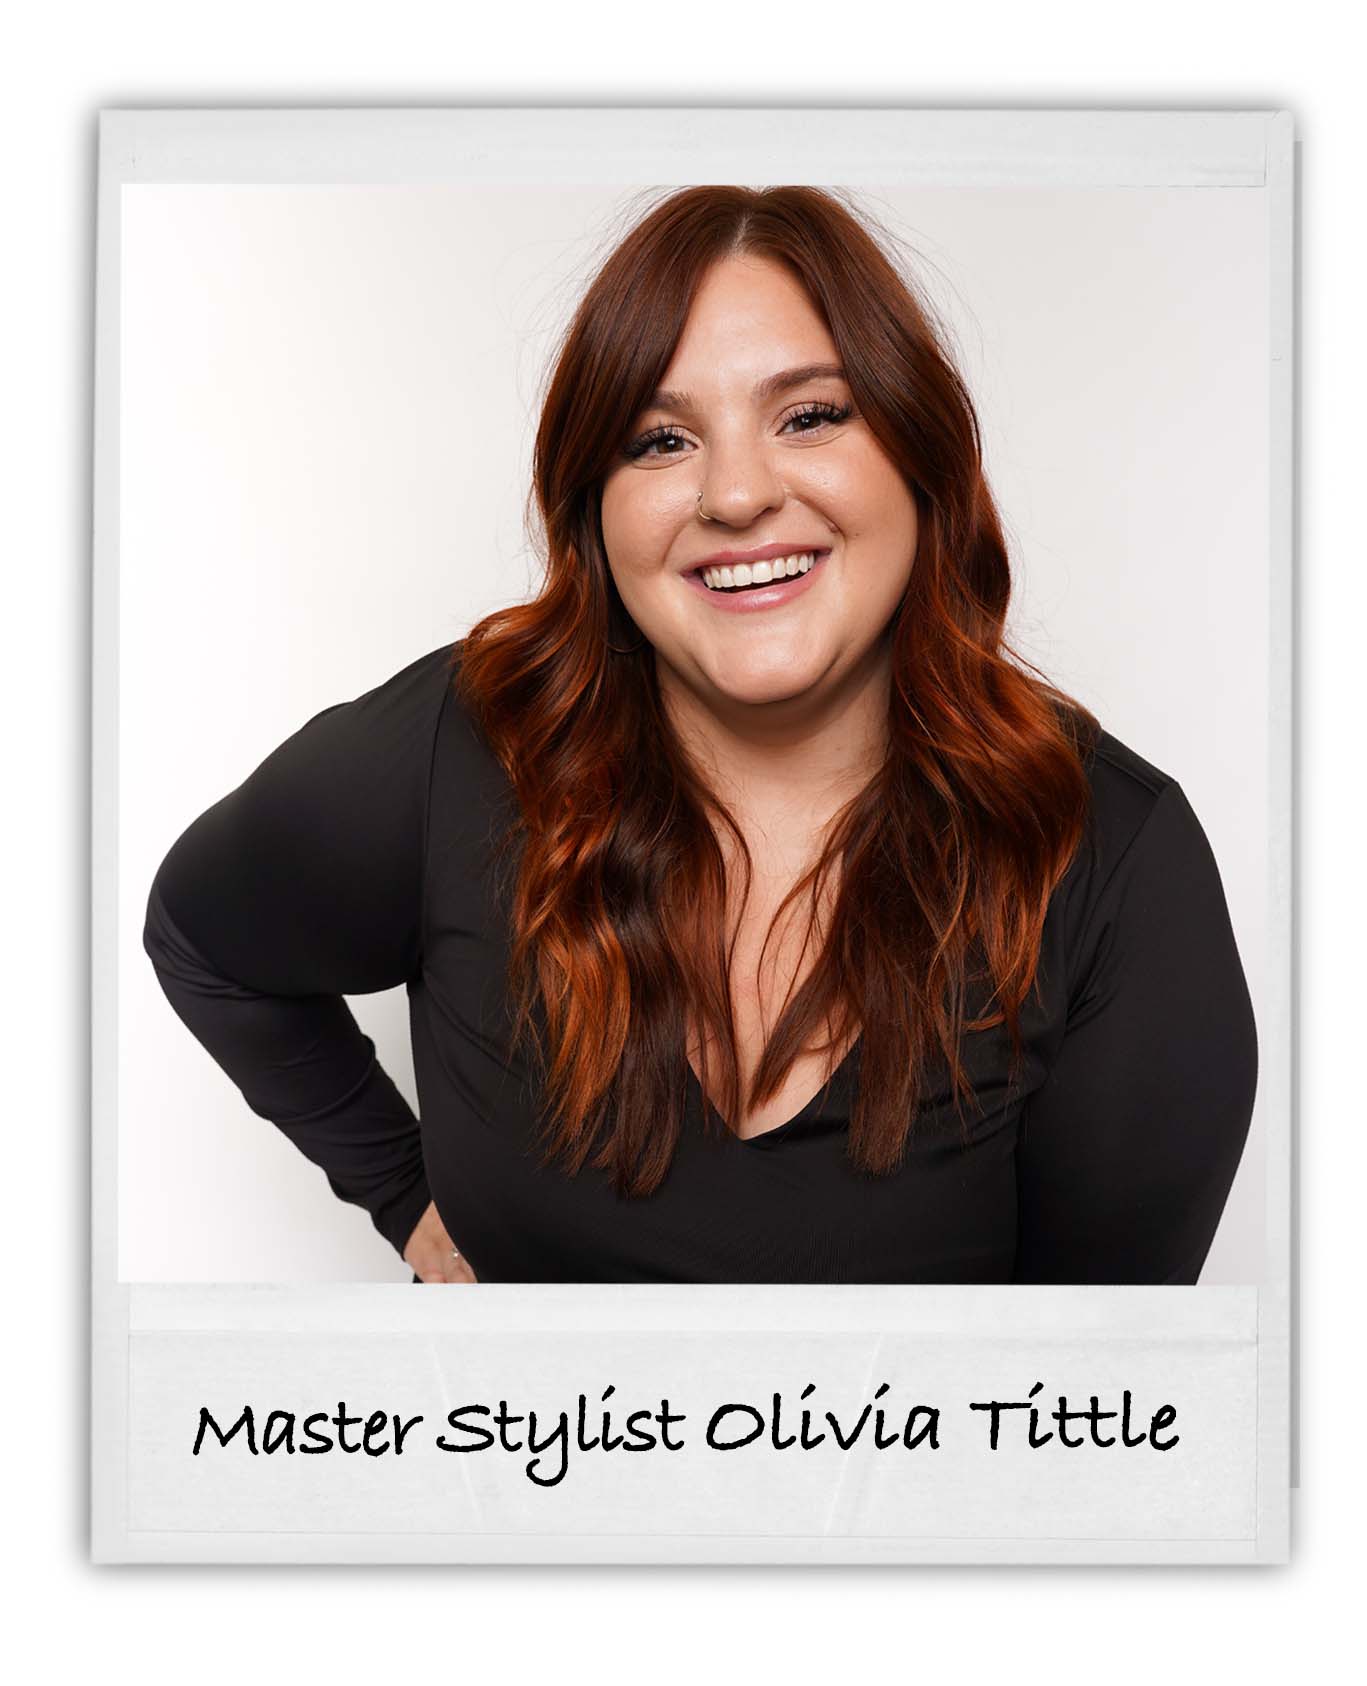 Image of Master stylist olivia tittle with red hair